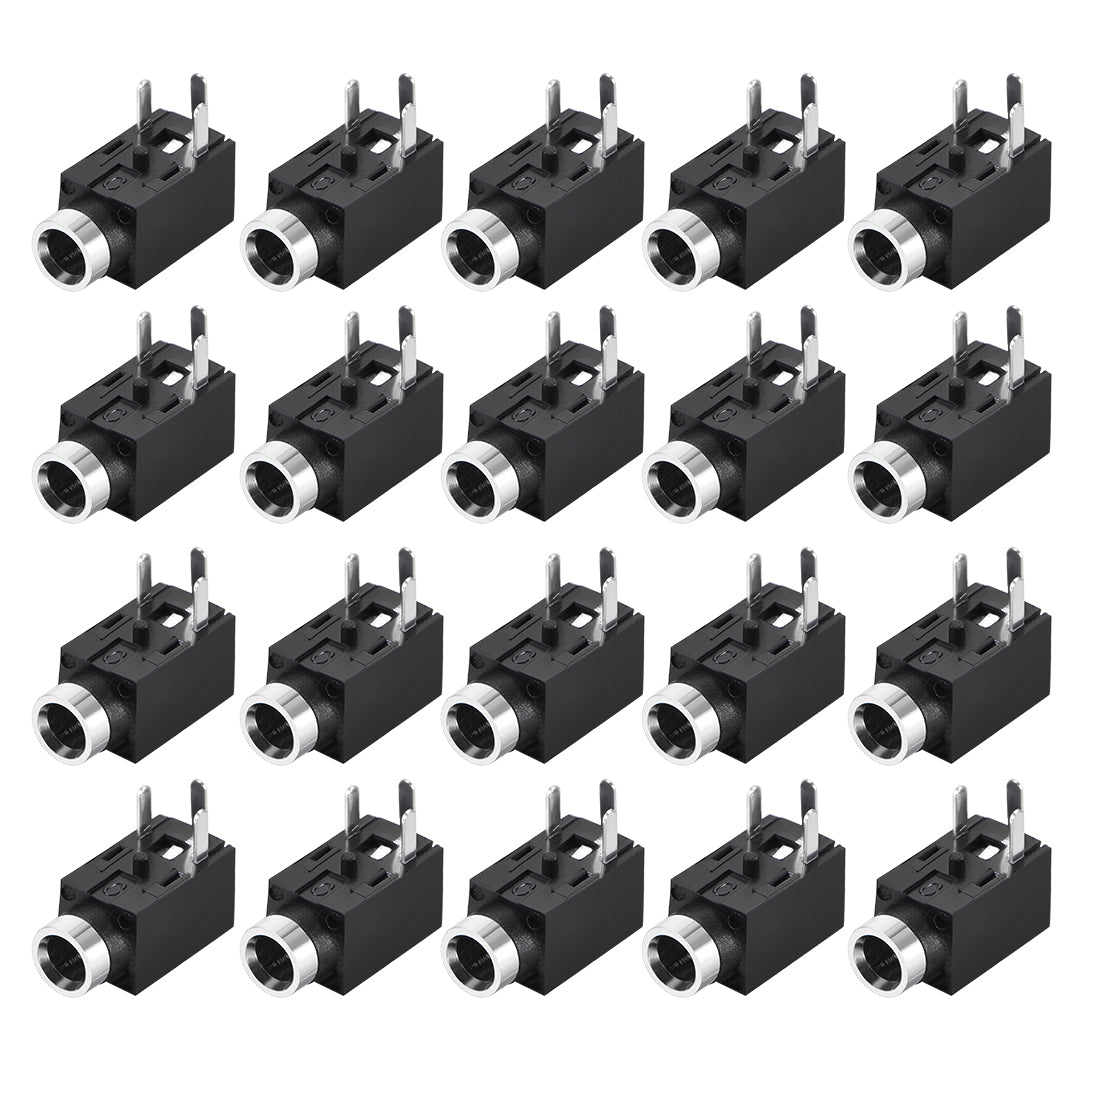 uxcell Uxcell PCB Mount 2.5mm 3 Pin Socket Headphone Stereo Jack Audio Video Connector PJ210 Black 20Pcs